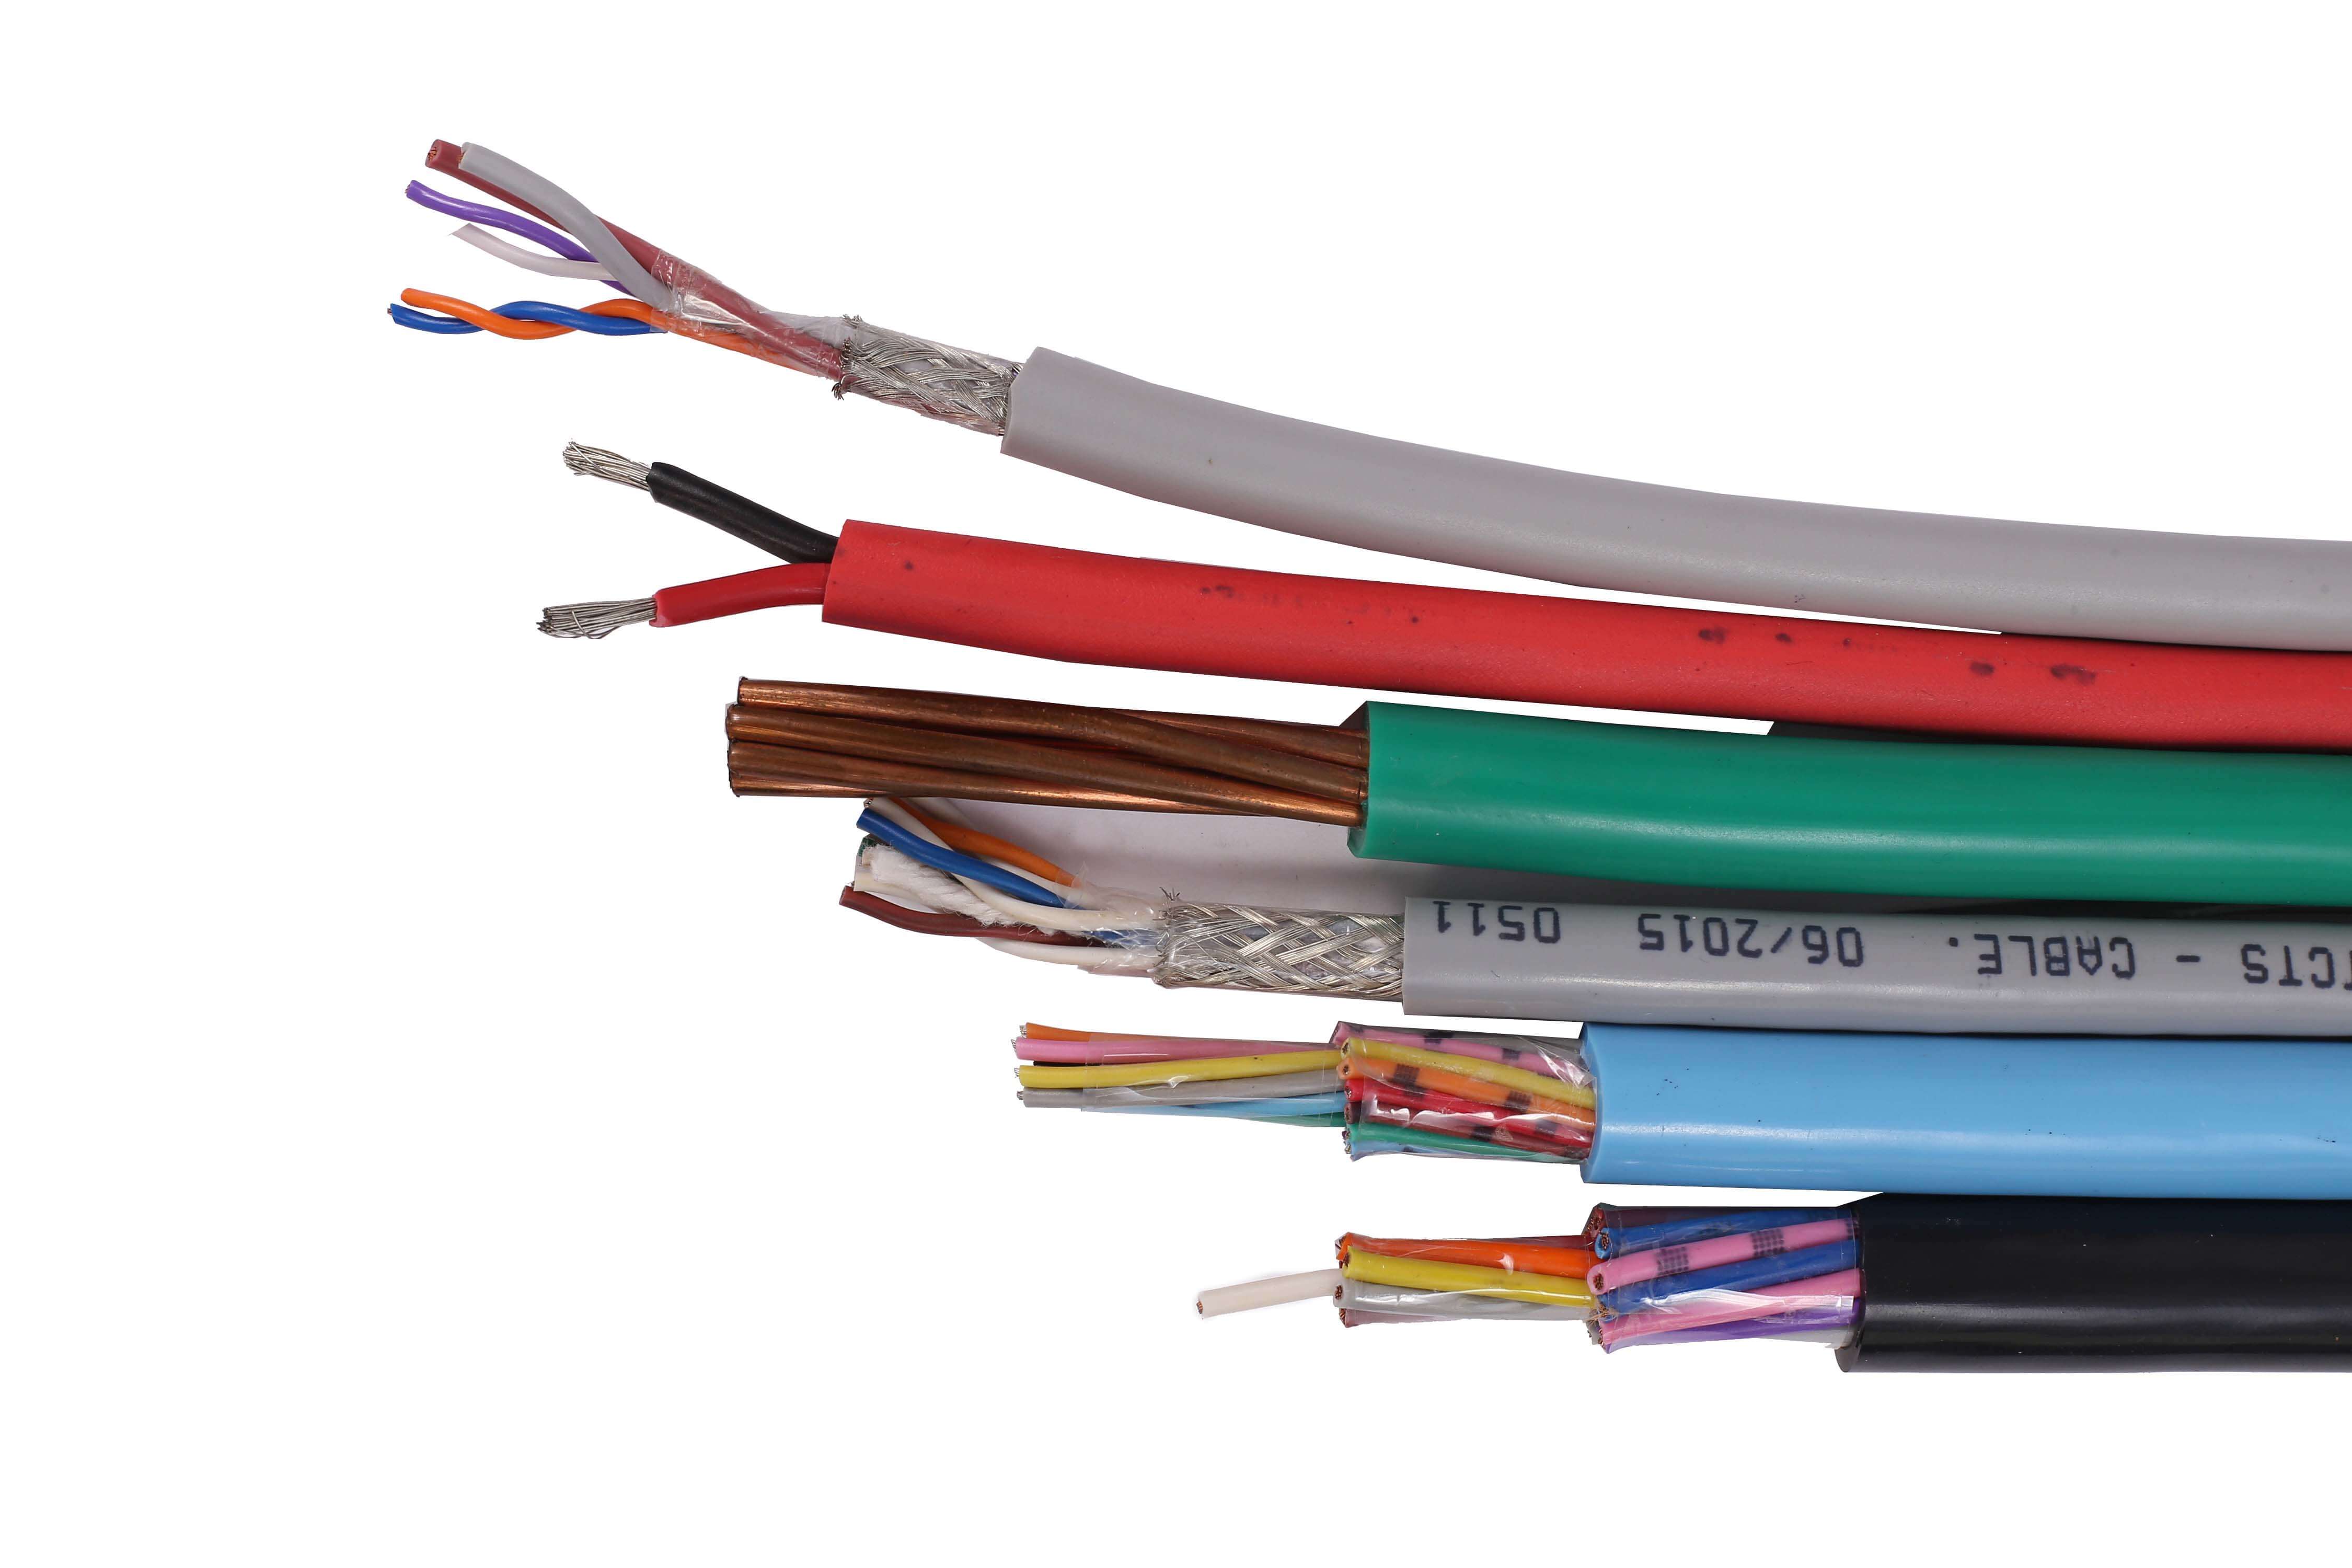 Multicore Industrial Flexible Cables